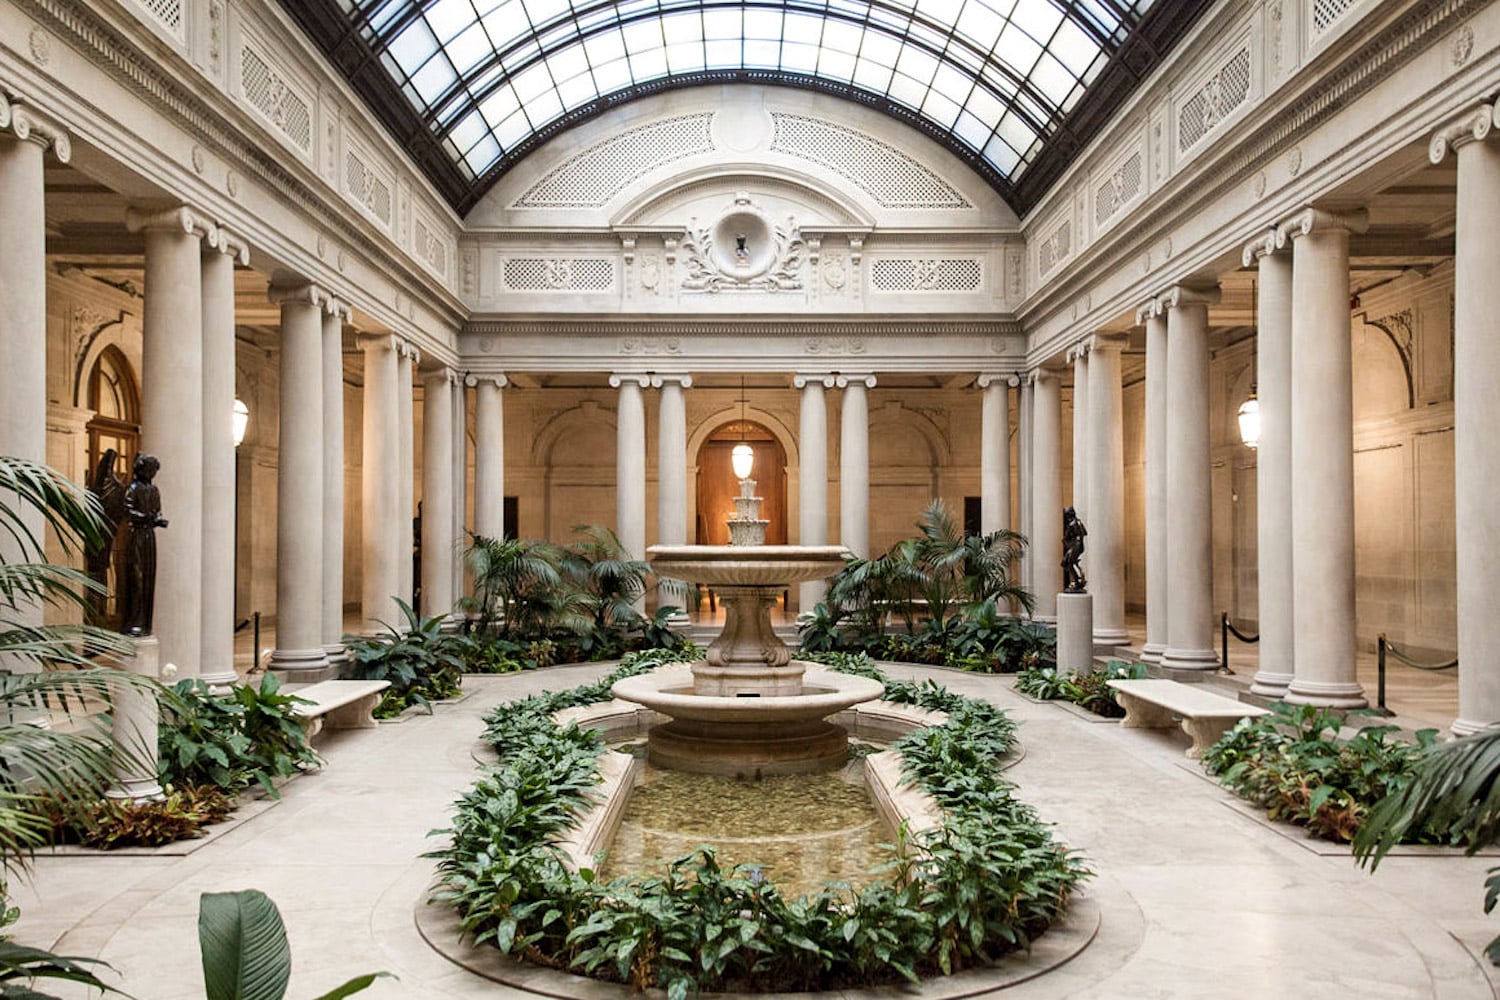 Frick Collection